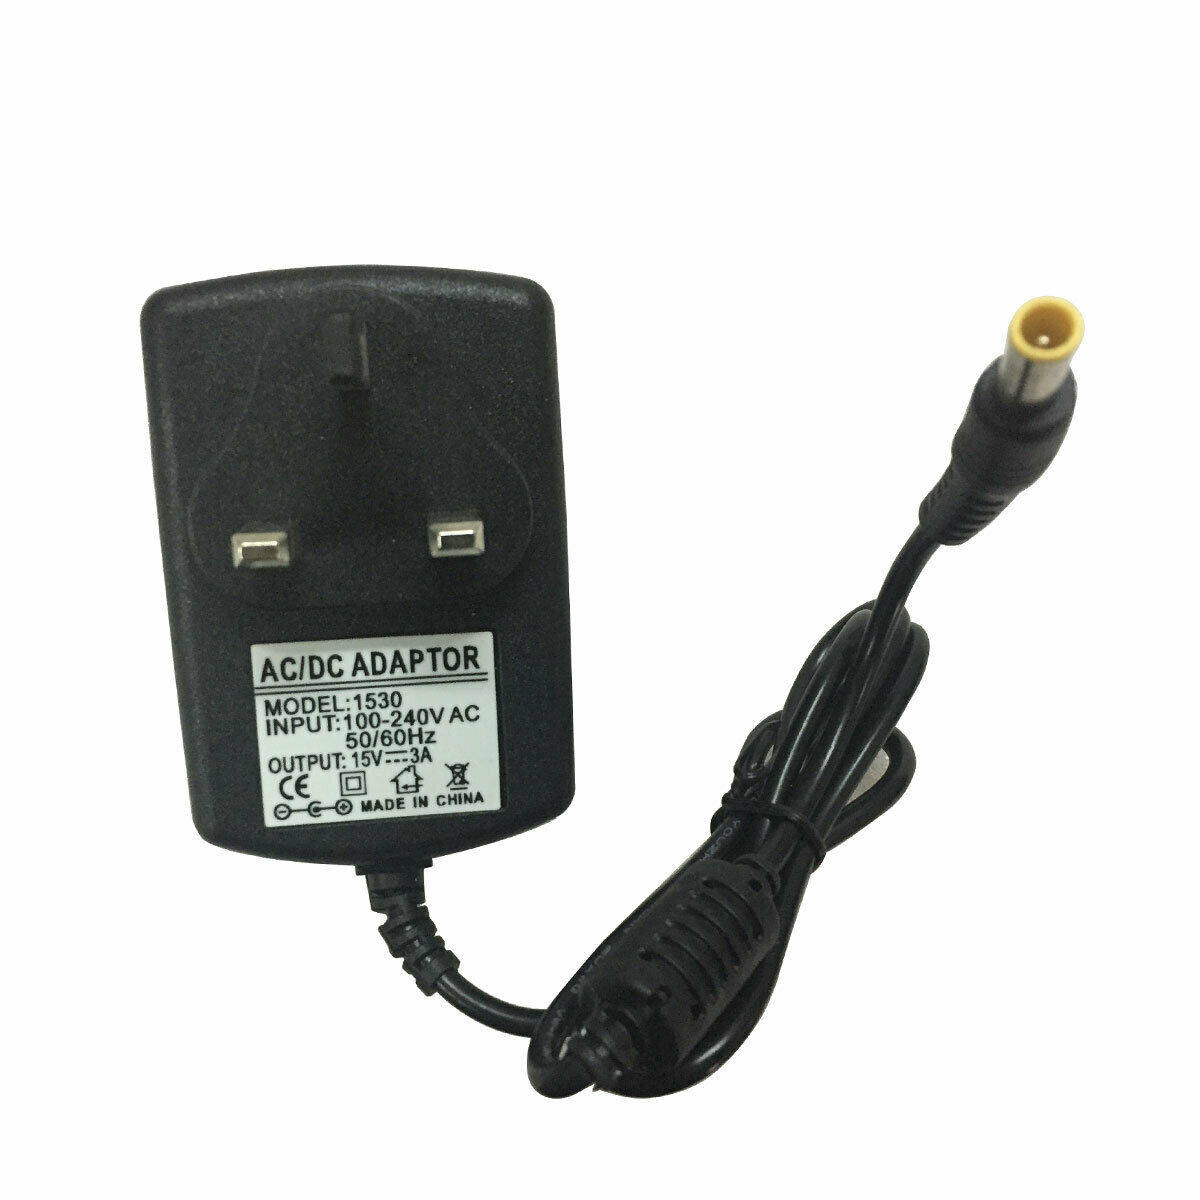 AC/DC Adapter for Sony SRS-X55 SRS-BTX500 SRS-XB3 Portable Bluetooth Speaker 15V For Sony SRS-X55 SRS-BTX500 SRS-XB3 - Click Image to Close